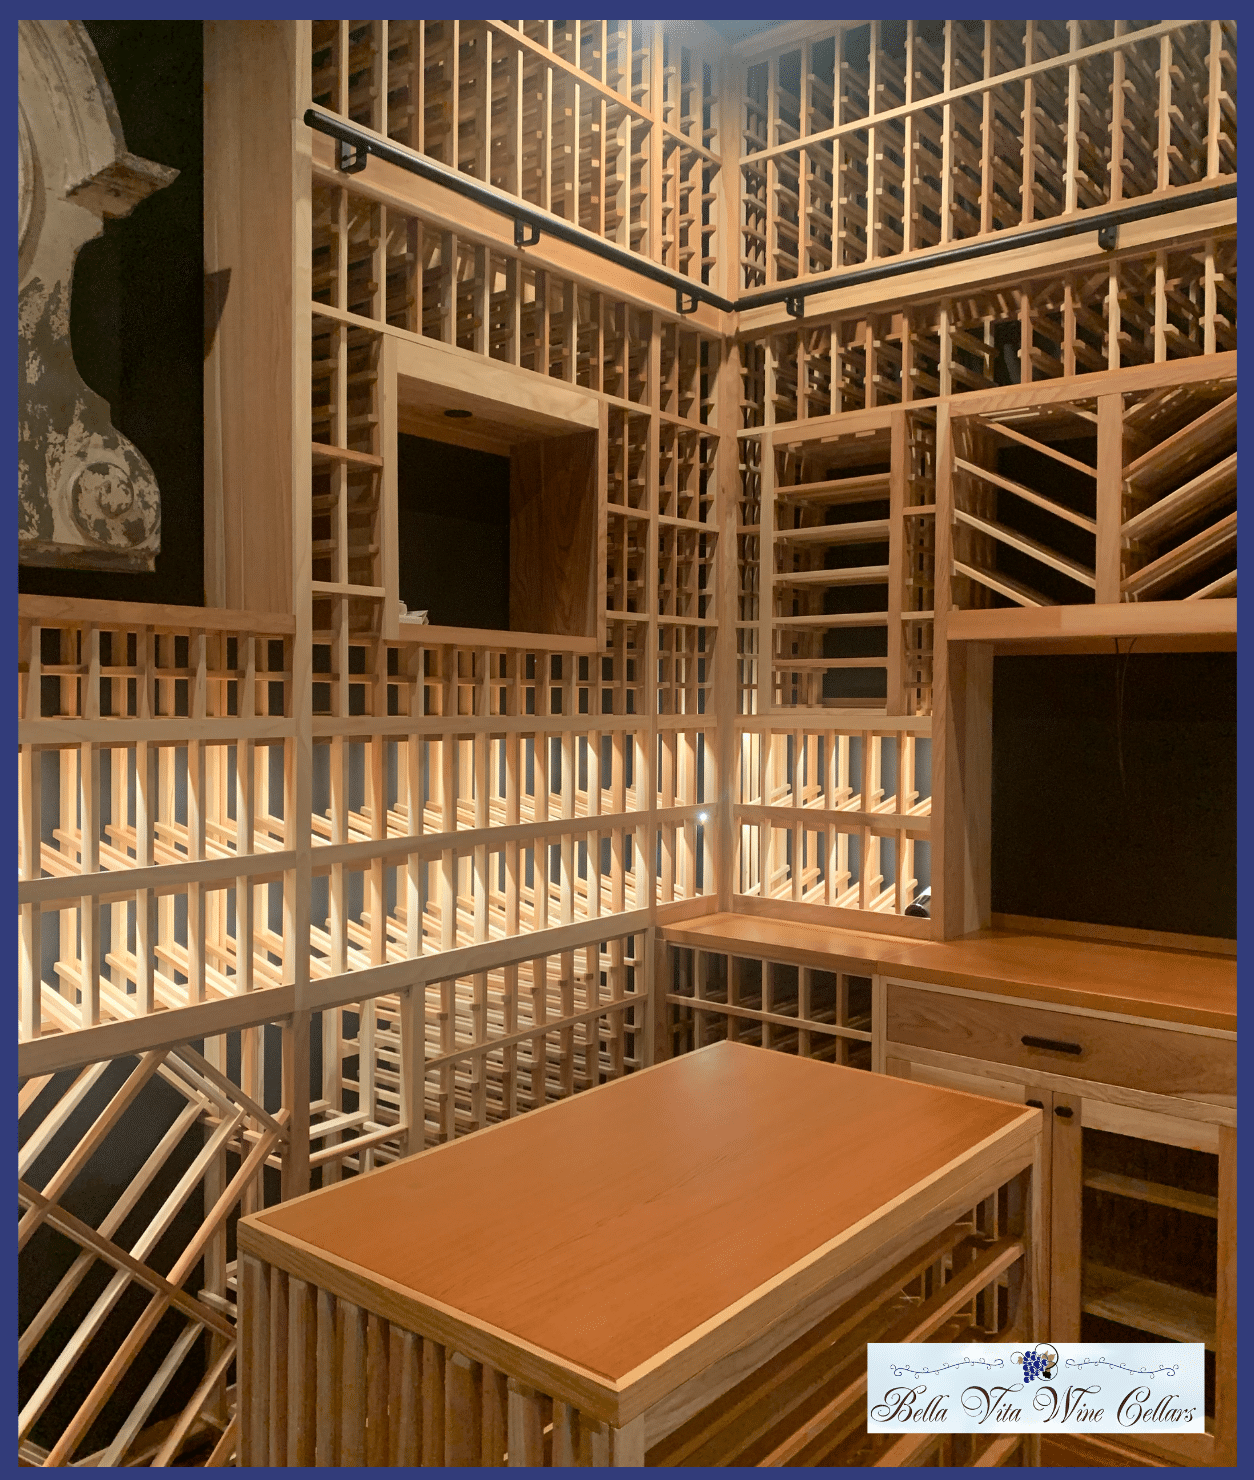 Our wooden wine racking system can display up to 2100 bottle capacity and has a range of unique racking design